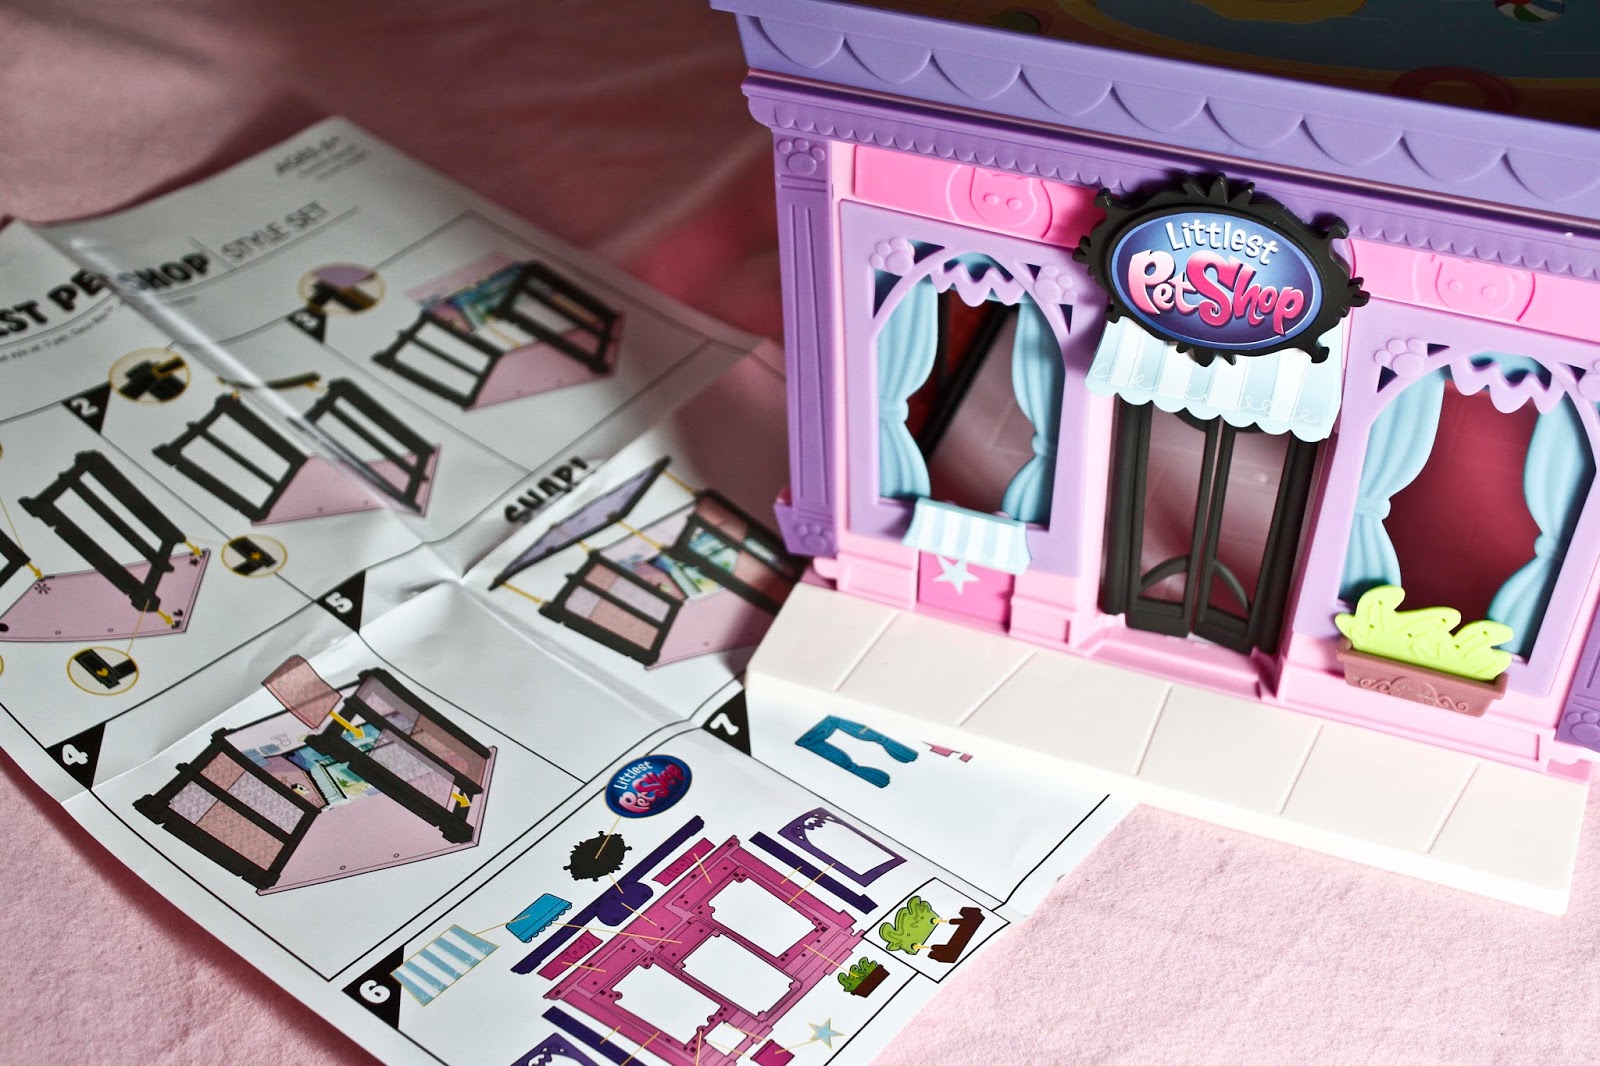 simple to follow instructions with the completed littlest pet shop building next to the littlest pet shop style set